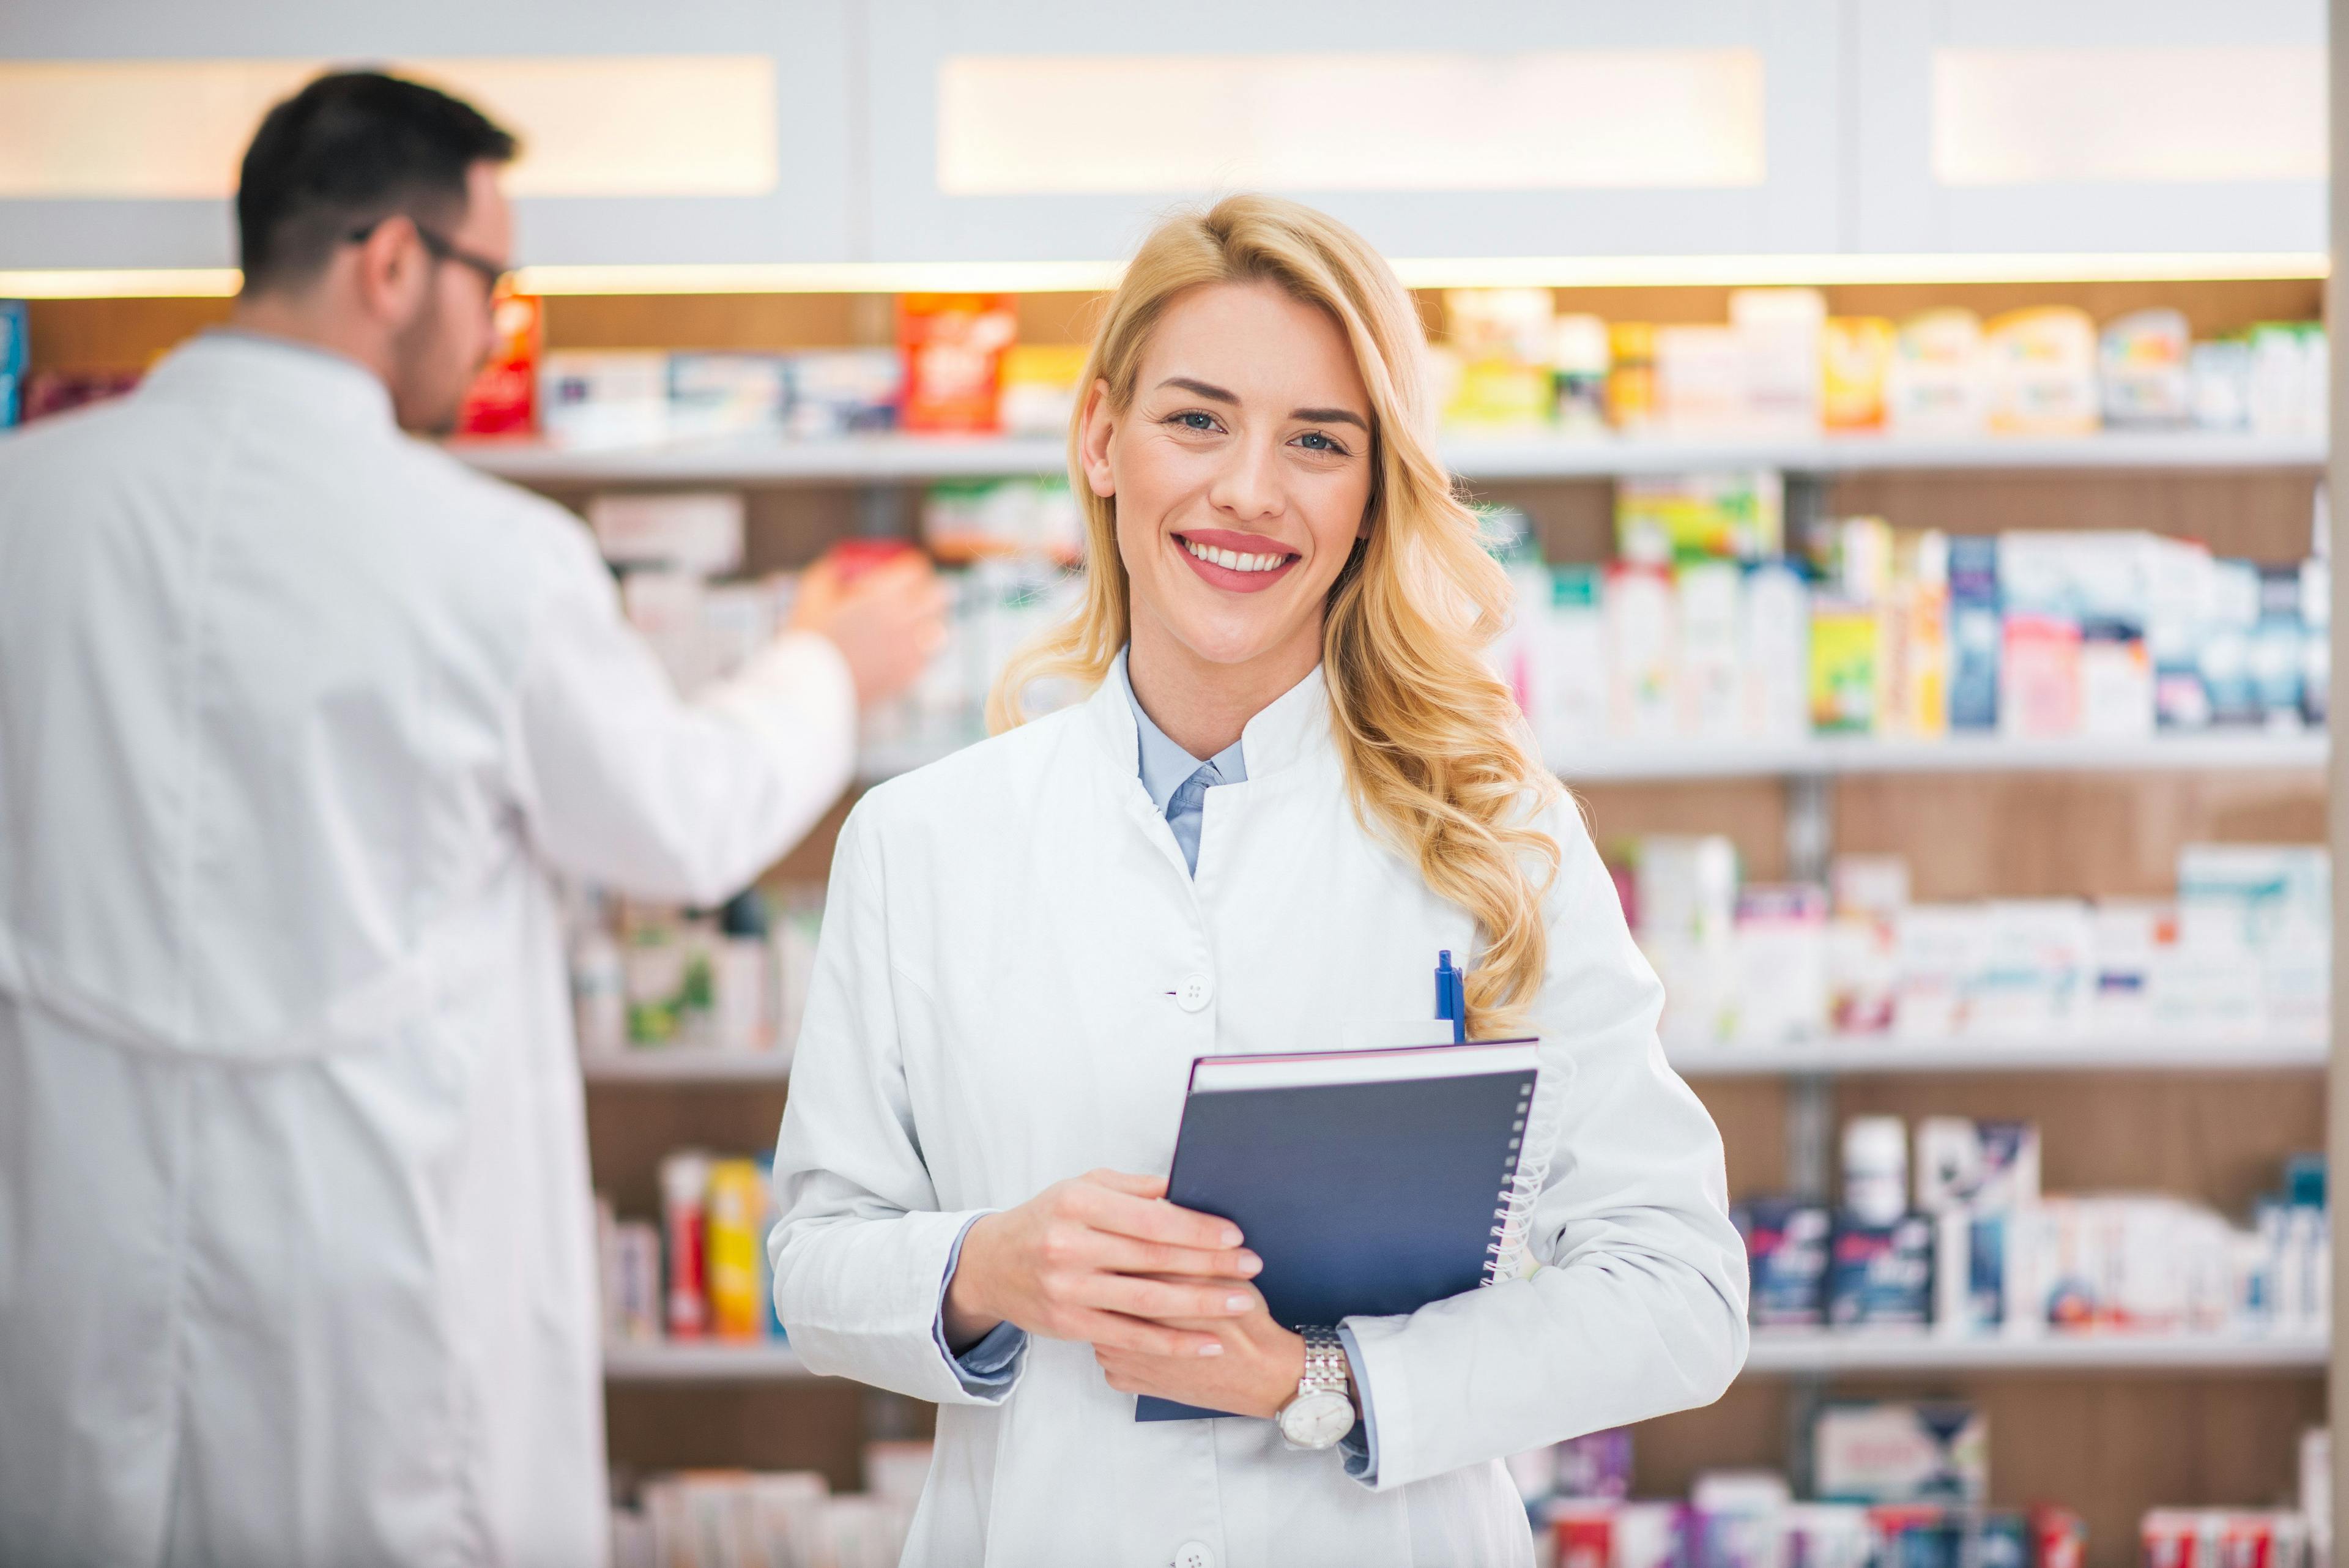 Portrait of a smiling female pharmacist, male colleague working with drugs in the background - Image credit: Bnenin | stock.adobe.com